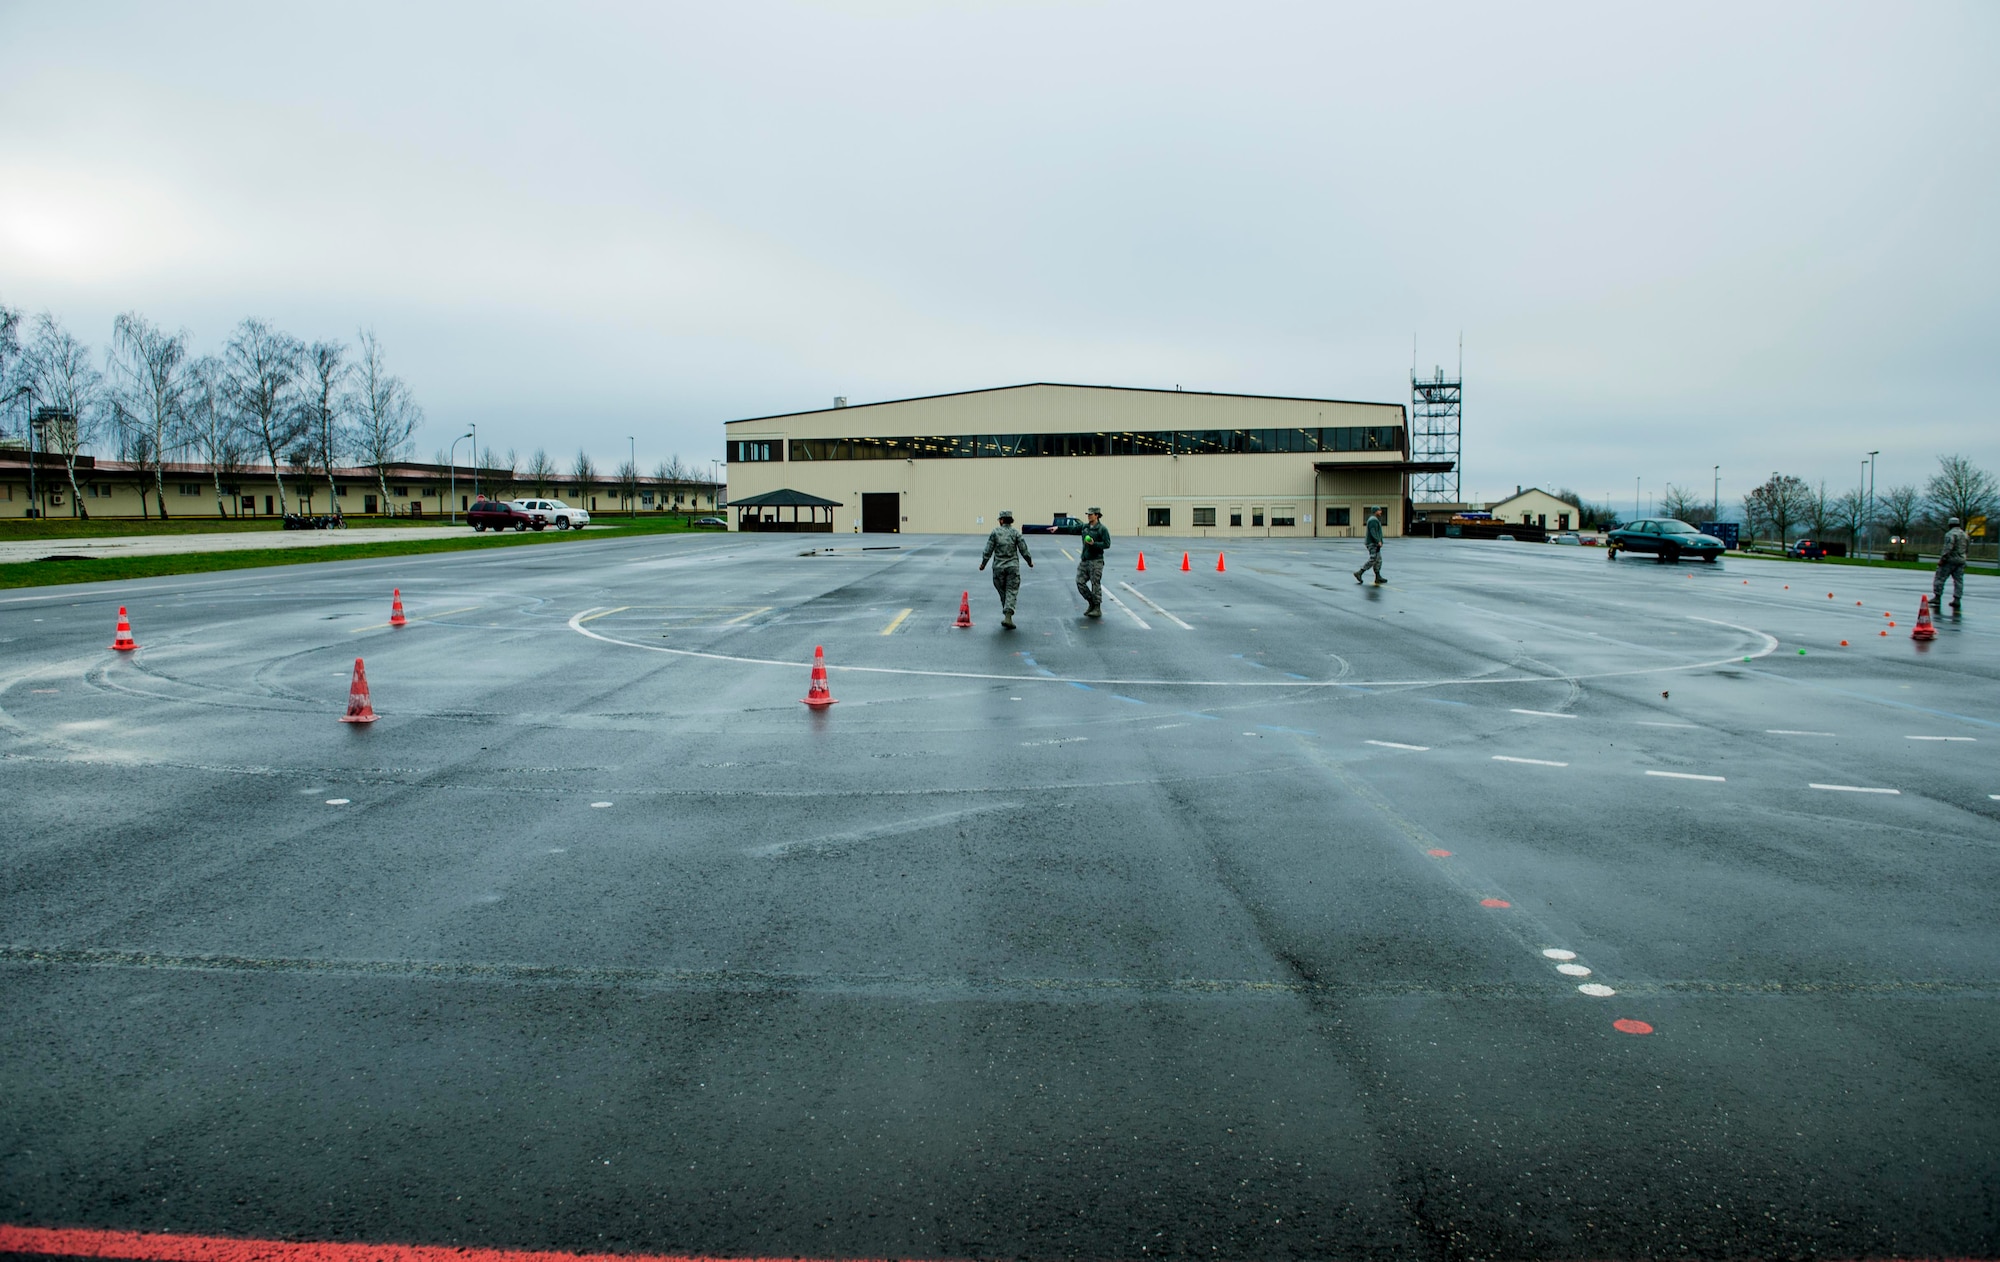 The 52nd Fighter Wing Safety team set up traffic cones at the Saber Driving Course before a training session at the driving course at Spangdahlem Air Base, Germany, Jan. 8, 2016. The course utilizes traffic cones and special markers at designated points that trainees must navigate under simulated road conditions. (U.S. Air Force photo by Airman 1st Class Timothy Kim/Released)